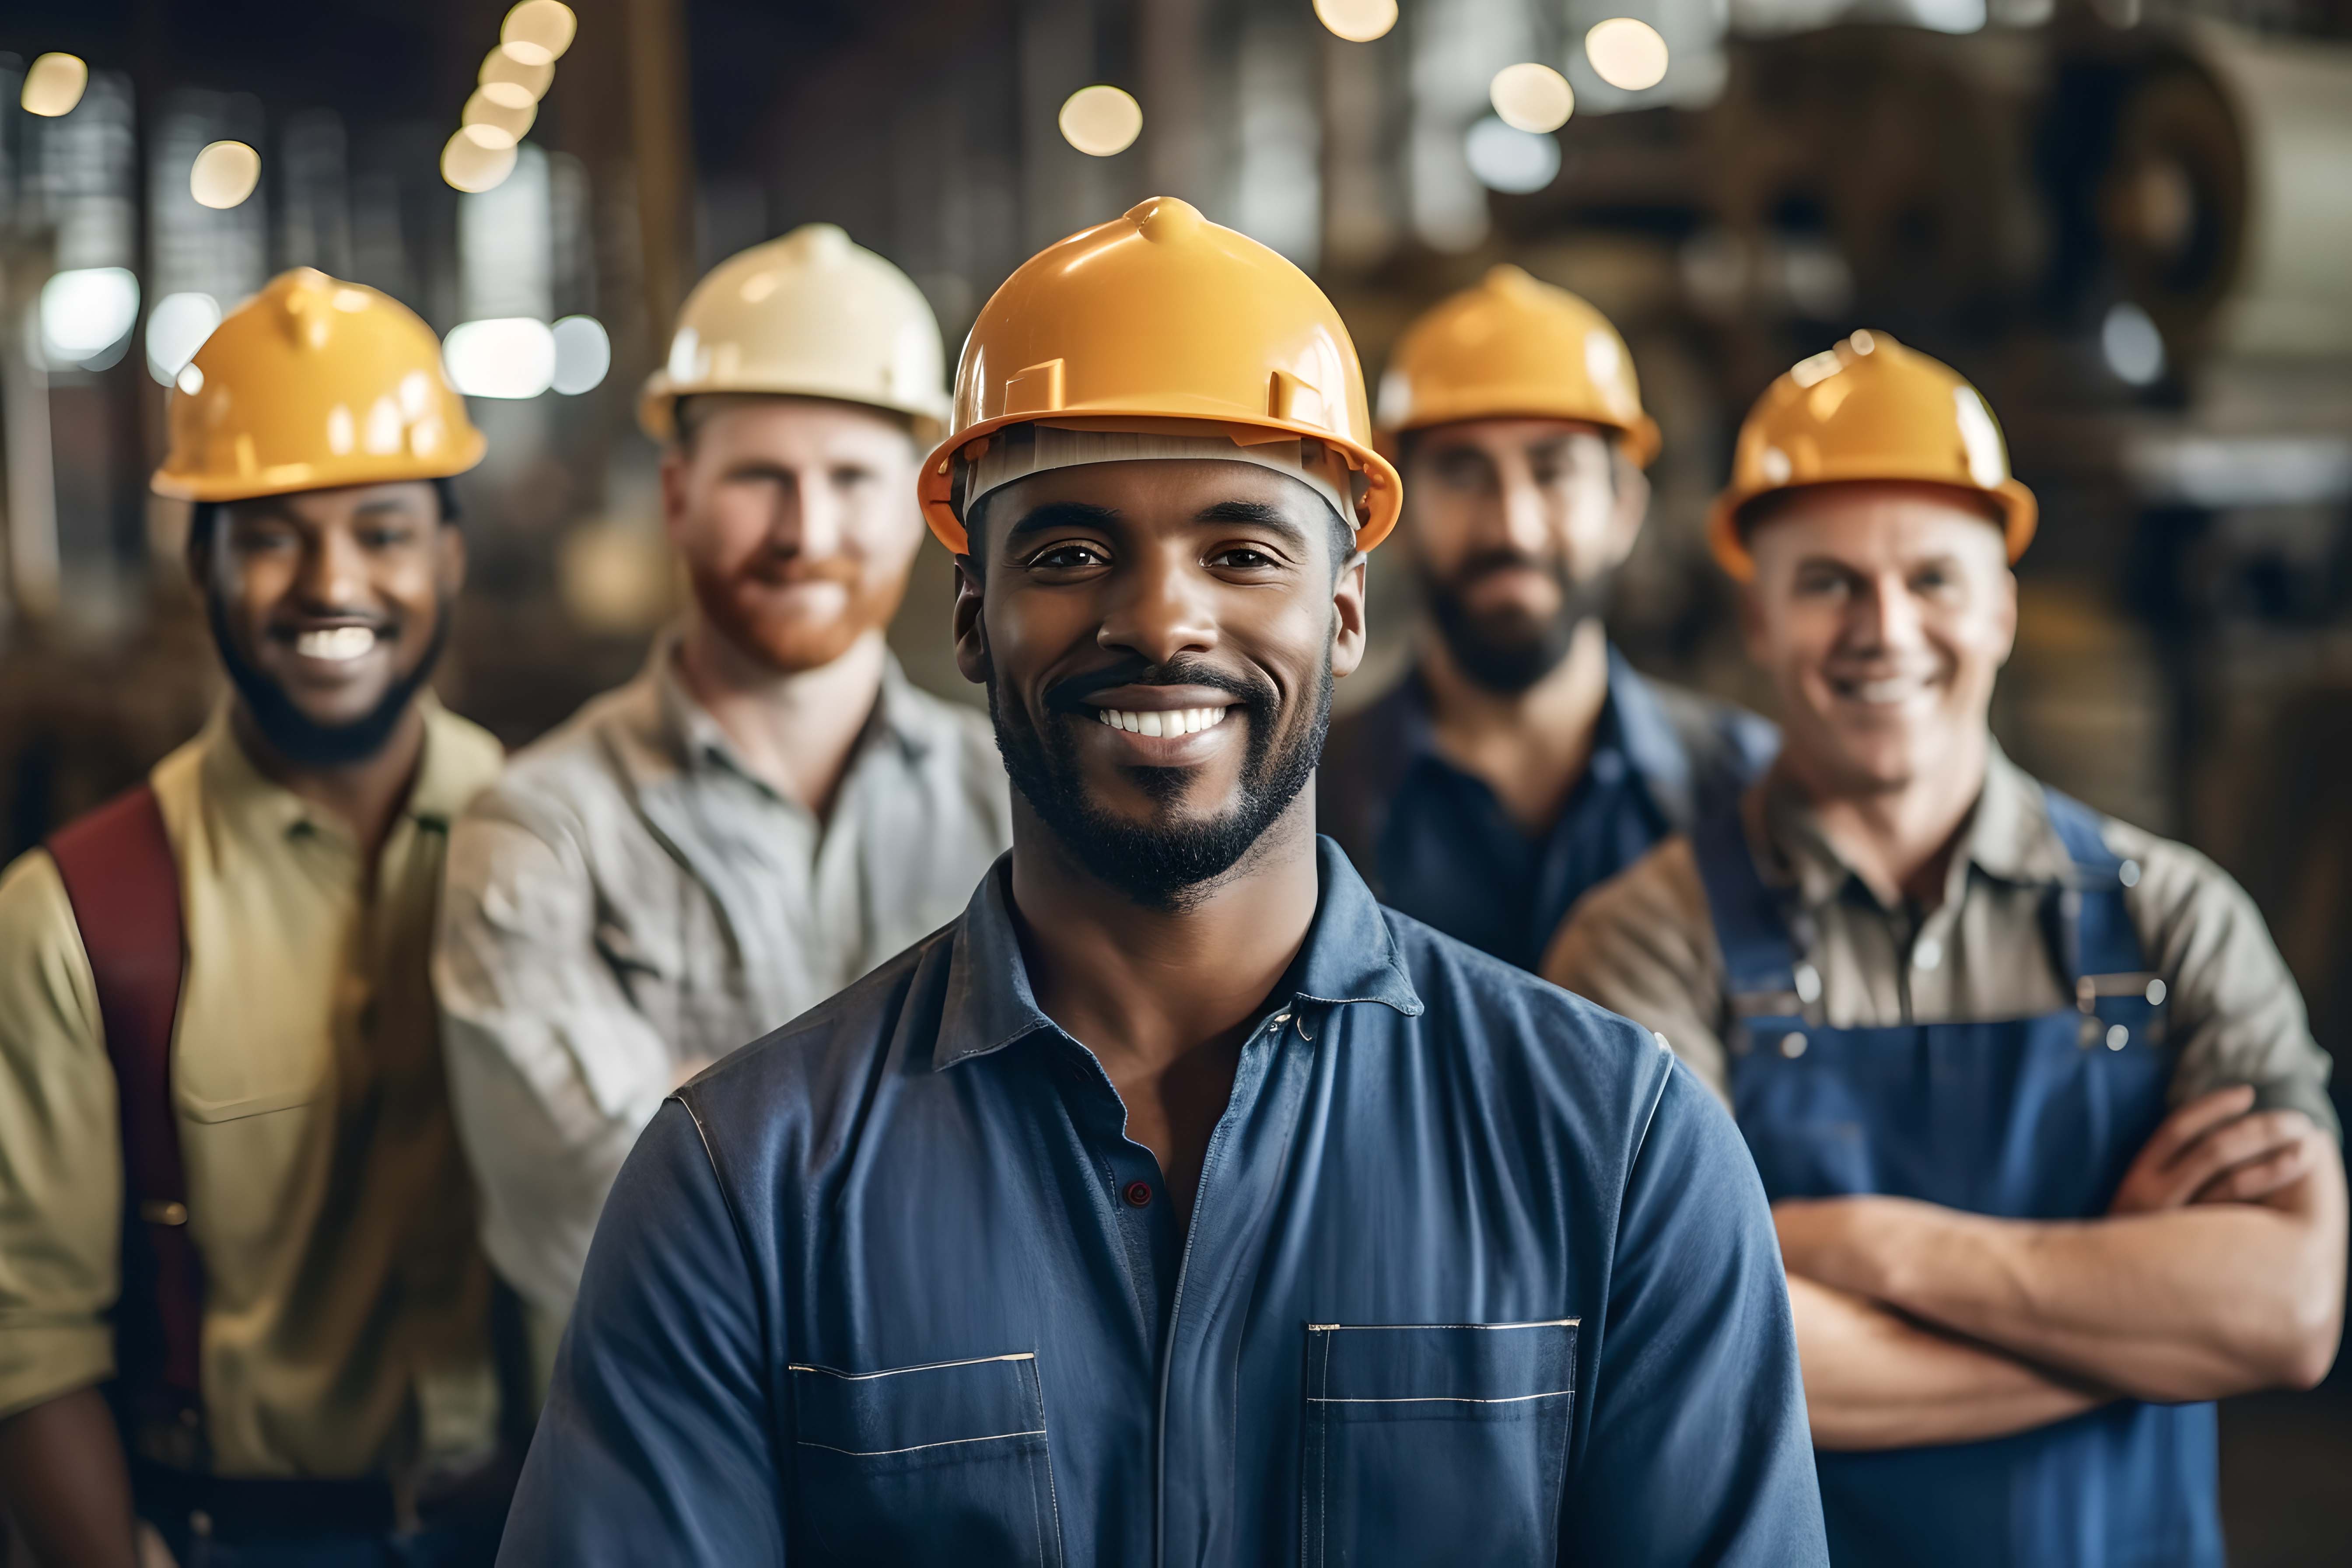 Group of industrial workers standing confident at industrial factory 